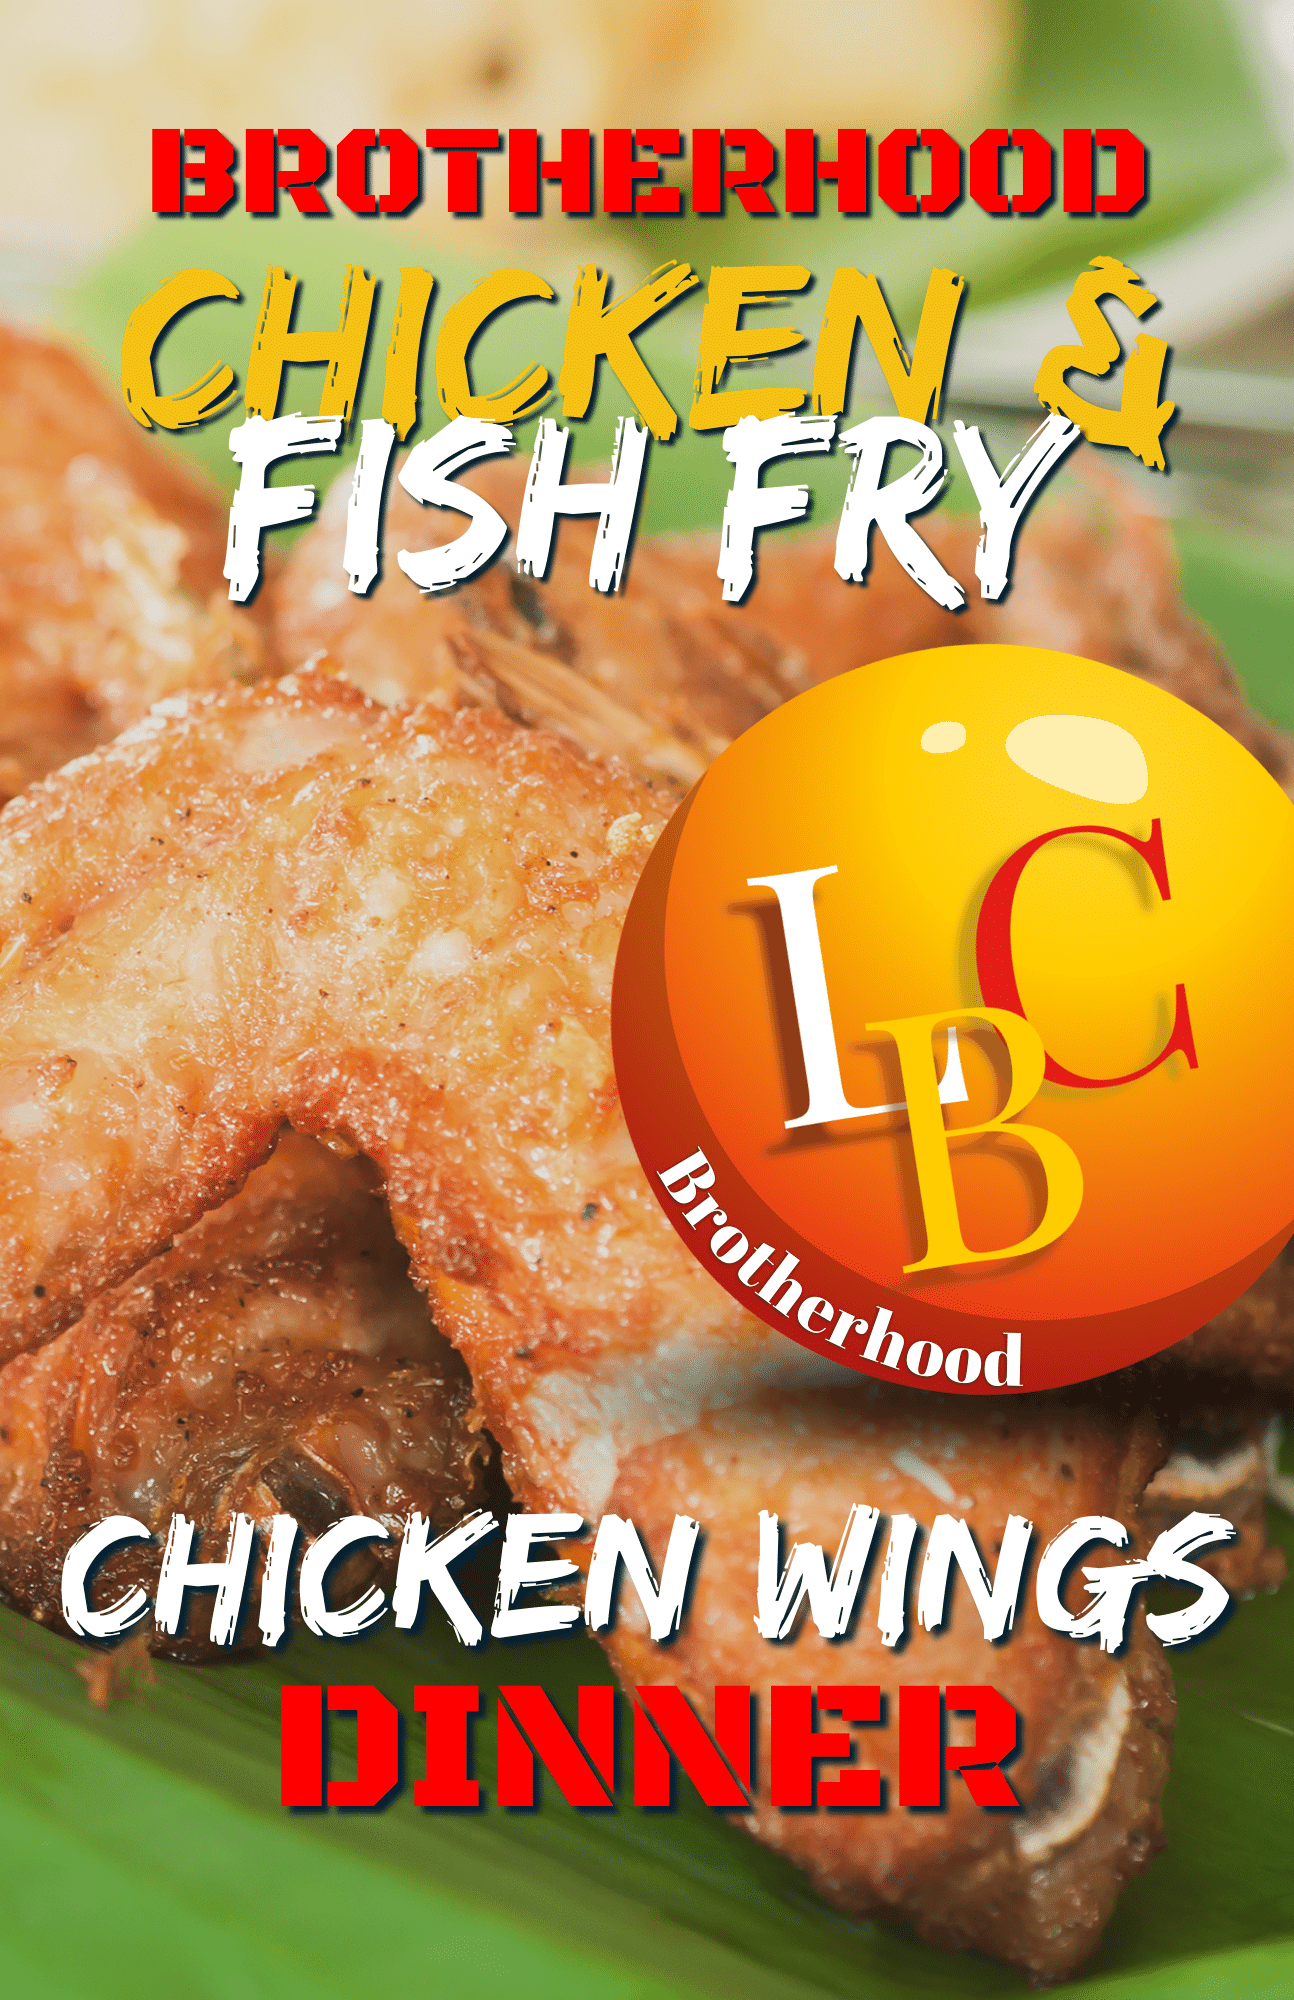 FishFry_ChickenWings_Product Image.png